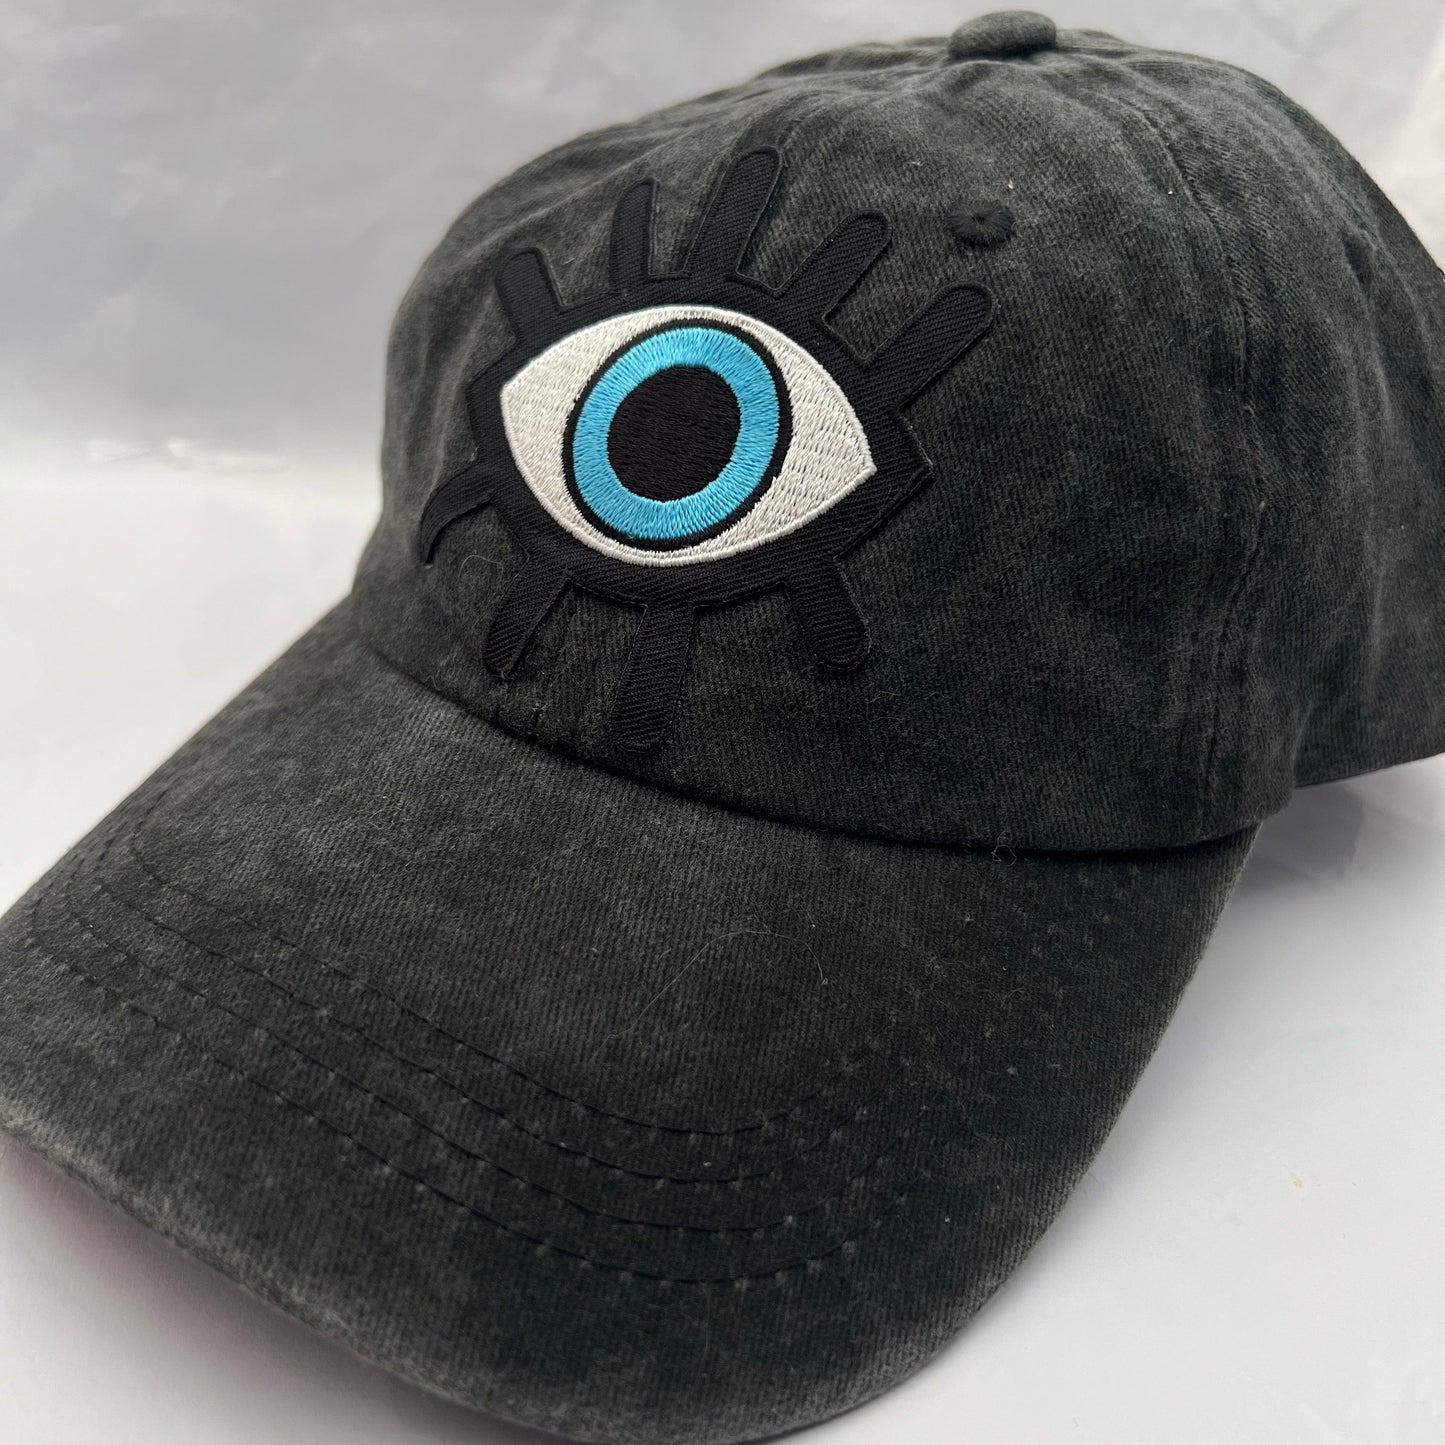 Black Grey Monster eye Embroidered patch on Cap Baseball Cap Cool Hat for Unisex